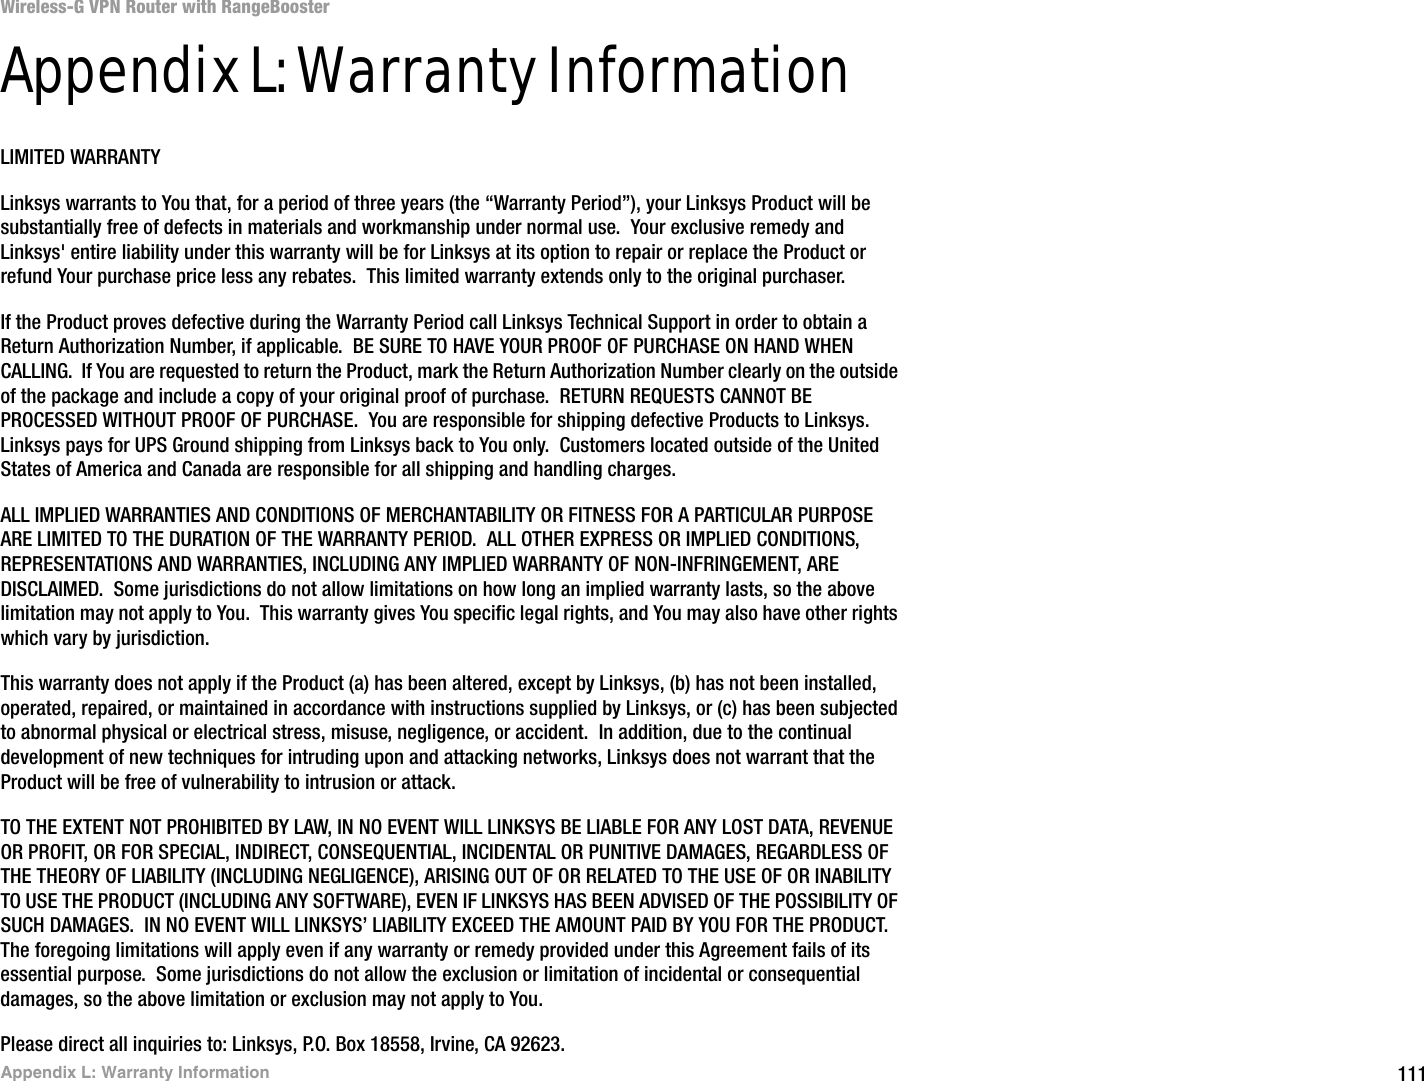 111Appendix L: Warranty InformationWireless-G VPN Router with RangeBoosterAppendix L: Warranty InformationLIMITED WARRANTYLinksys warrants to You that, for a period of three years (the “Warranty Period”), your Linksys Product will be substantially free of defects in materials and workmanship under normal use.  Your exclusive remedy and Linksys&apos; entire liability under this warranty will be for Linksys at its option to repair or replace the Product or refund Your purchase price less any rebates.  This limited warranty extends only to the original purchaser.  If the Product proves defective during the Warranty Period call Linksys Technical Support in order to obtain a Return Authorization Number, if applicable.  BE SURE TO HAVE YOUR PROOF OF PURCHASE ON HAND WHEN CALLING.  If You are requested to return the Product, mark the Return Authorization Number clearly on the outside of the package and include a copy of your original proof of purchase.  RETURN REQUESTS CANNOT BE PROCESSED WITHOUT PROOF OF PURCHASE.  You are responsible for shipping defective Products to Linksys.  Linksys pays for UPS Ground shipping from Linksys back to You only.  Customers located outside of the United States of America and Canada are responsible for all shipping and handling charges. ALL IMPLIED WARRANTIES AND CONDITIONS OF MERCHANTABILITY OR FITNESS FOR A PARTICULAR PURPOSE ARE LIMITED TO THE DURATION OF THE WARRANTY PERIOD.  ALL OTHER EXPRESS OR IMPLIED CONDITIONS, REPRESENTATIONS AND WARRANTIES, INCLUDING ANY IMPLIED WARRANTY OF NON-INFRINGEMENT, ARE DISCLAIMED.  Some jurisdictions do not allow limitations on how long an implied warranty lasts, so the above limitation may not apply to You.  This warranty gives You specific legal rights, and You may also have other rights which vary by jurisdiction.This warranty does not apply if the Product (a) has been altered, except by Linksys, (b) has not been installed, operated, repaired, or maintained in accordance with instructions supplied by Linksys, or (c) has been subjected to abnormal physical or electrical stress, misuse, negligence, or accident.  In addition, due to the continual development of new techniques for intruding upon and attacking networks, Linksys does not warrant that the Product will be free of vulnerability to intrusion or attack.TO THE EXTENT NOT PROHIBITED BY LAW, IN NO EVENT WILL LINKSYS BE LIABLE FOR ANY LOST DATA, REVENUE OR PROFIT, OR FOR SPECIAL, INDIRECT, CONSEQUENTIAL, INCIDENTAL OR PUNITIVE DAMAGES, REGARDLESS OF THE THEORY OF LIABILITY (INCLUDING NEGLIGENCE), ARISING OUT OF OR RELATED TO THE USE OF OR INABILITY TO USE THE PRODUCT (INCLUDING ANY SOFTWARE), EVEN IF LINKSYS HAS BEEN ADVISED OF THE POSSIBILITY OF SUCH DAMAGES.  IN NO EVENT WILL LINKSYS’ LIABILITY EXCEED THE AMOUNT PAID BY YOU FOR THE PRODUCT.  The foregoing limitations will apply even if any warranty or remedy provided under this Agreement fails of its essential purpose.  Some jurisdictions do not allow the exclusion or limitation of incidental or consequential damages, so the above limitation or exclusion may not apply to You.Please direct all inquiries to: Linksys, P.O. Box 18558, Irvine, CA 92623.